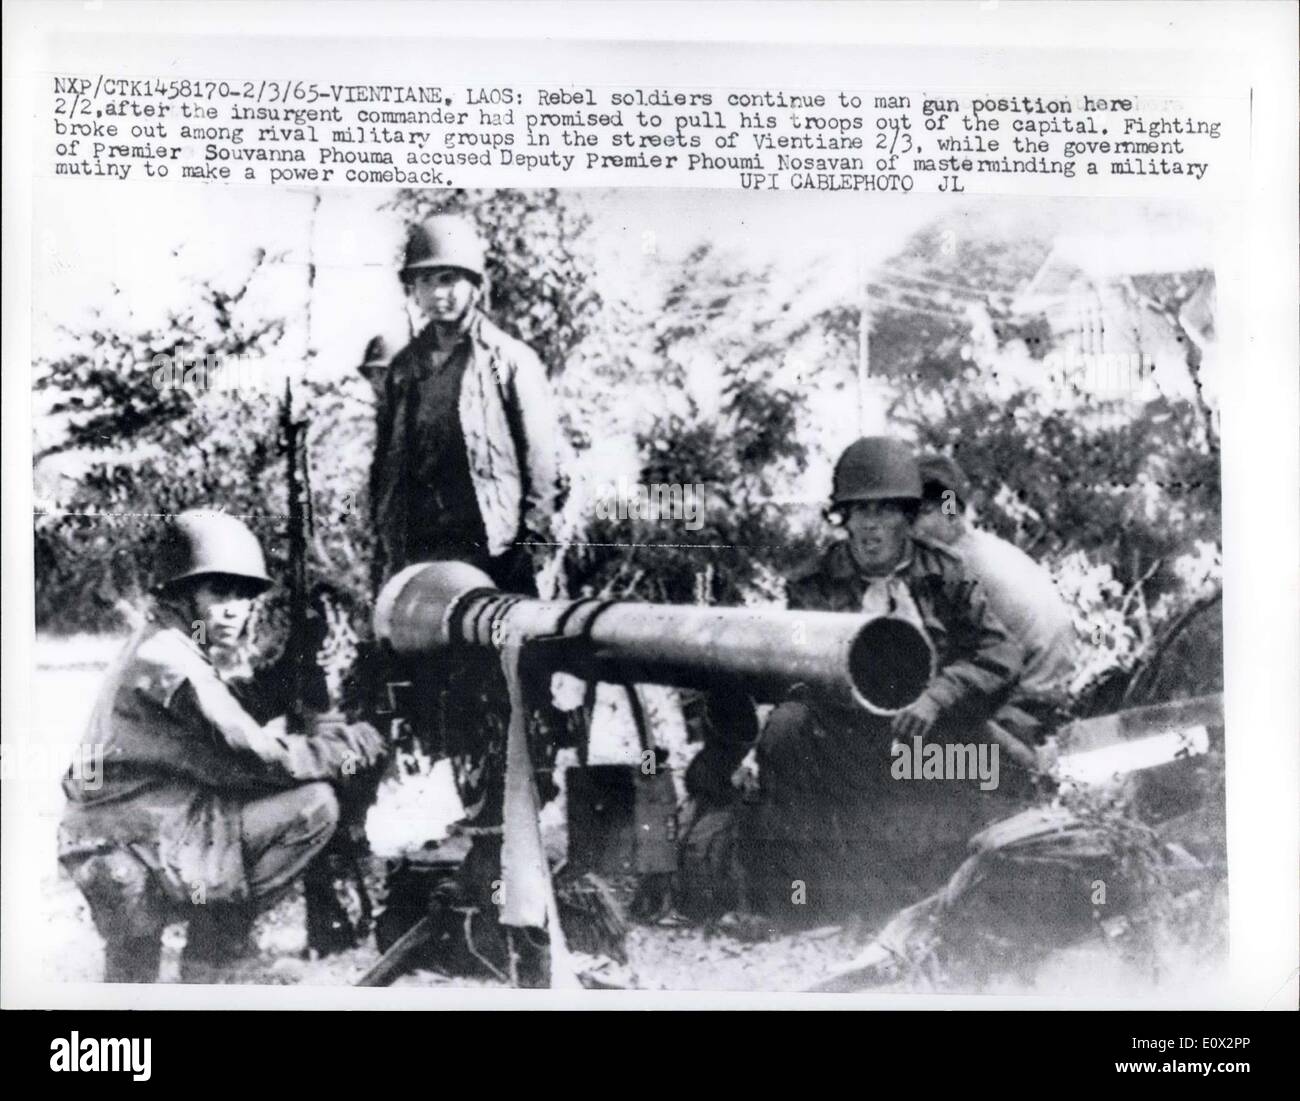 Mar. 02, 1965 - Vietiane, Laos: Rebel soldiers continue to man gun position here 2/2, after the insurgent commander had promised to pull his trooos out of the capital. Fighting broke out among rival military groups in the streets of Vientiane 2/3, while the government of Premier Souvanna Phouma accused Deputy Premier Phoumi Nosavan of masterminding a military munity to make a power comeback. Stock Photo